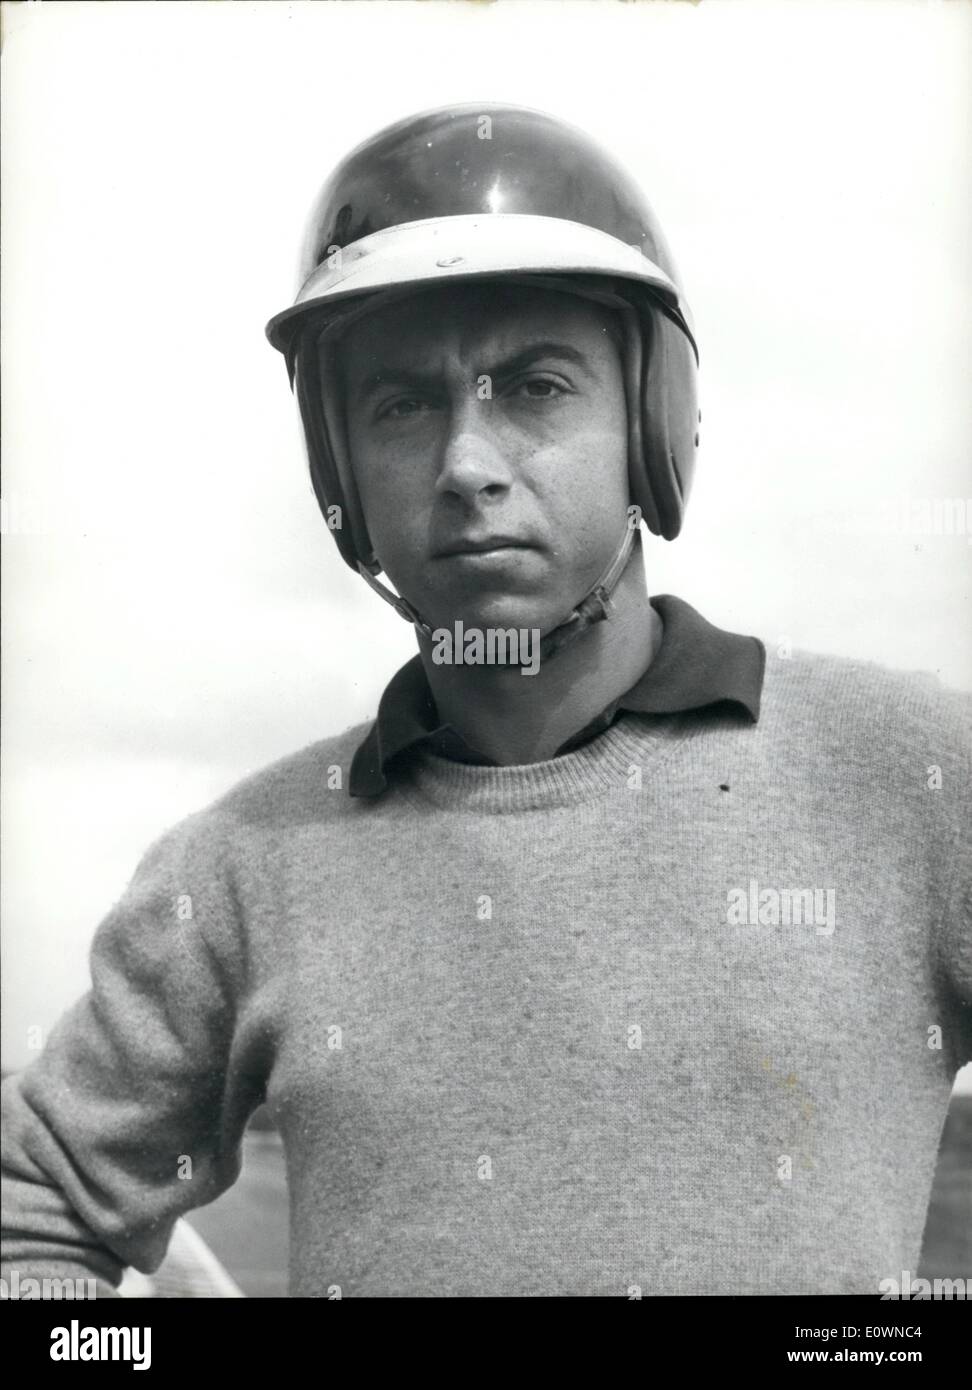 Oct. 10, 1963 - Antonio Ascary aged 21 the son of famous motorcar driver champion Alberto Ascari dead on 1955 during a test of a Ferrari on the autodrome of Monza, wants to emulate his great father. In spite of bad destiny that seems to follow Ascari family (his grandfather dead on 1929 testing a car and was a big champion for many years), the young Antonio is following a special training course for motorcar drivers at Vallelunga Home's autodrome, under the supervision of Roberto Lippi the famous trainer who has been for years an italian champion. Stock Photo